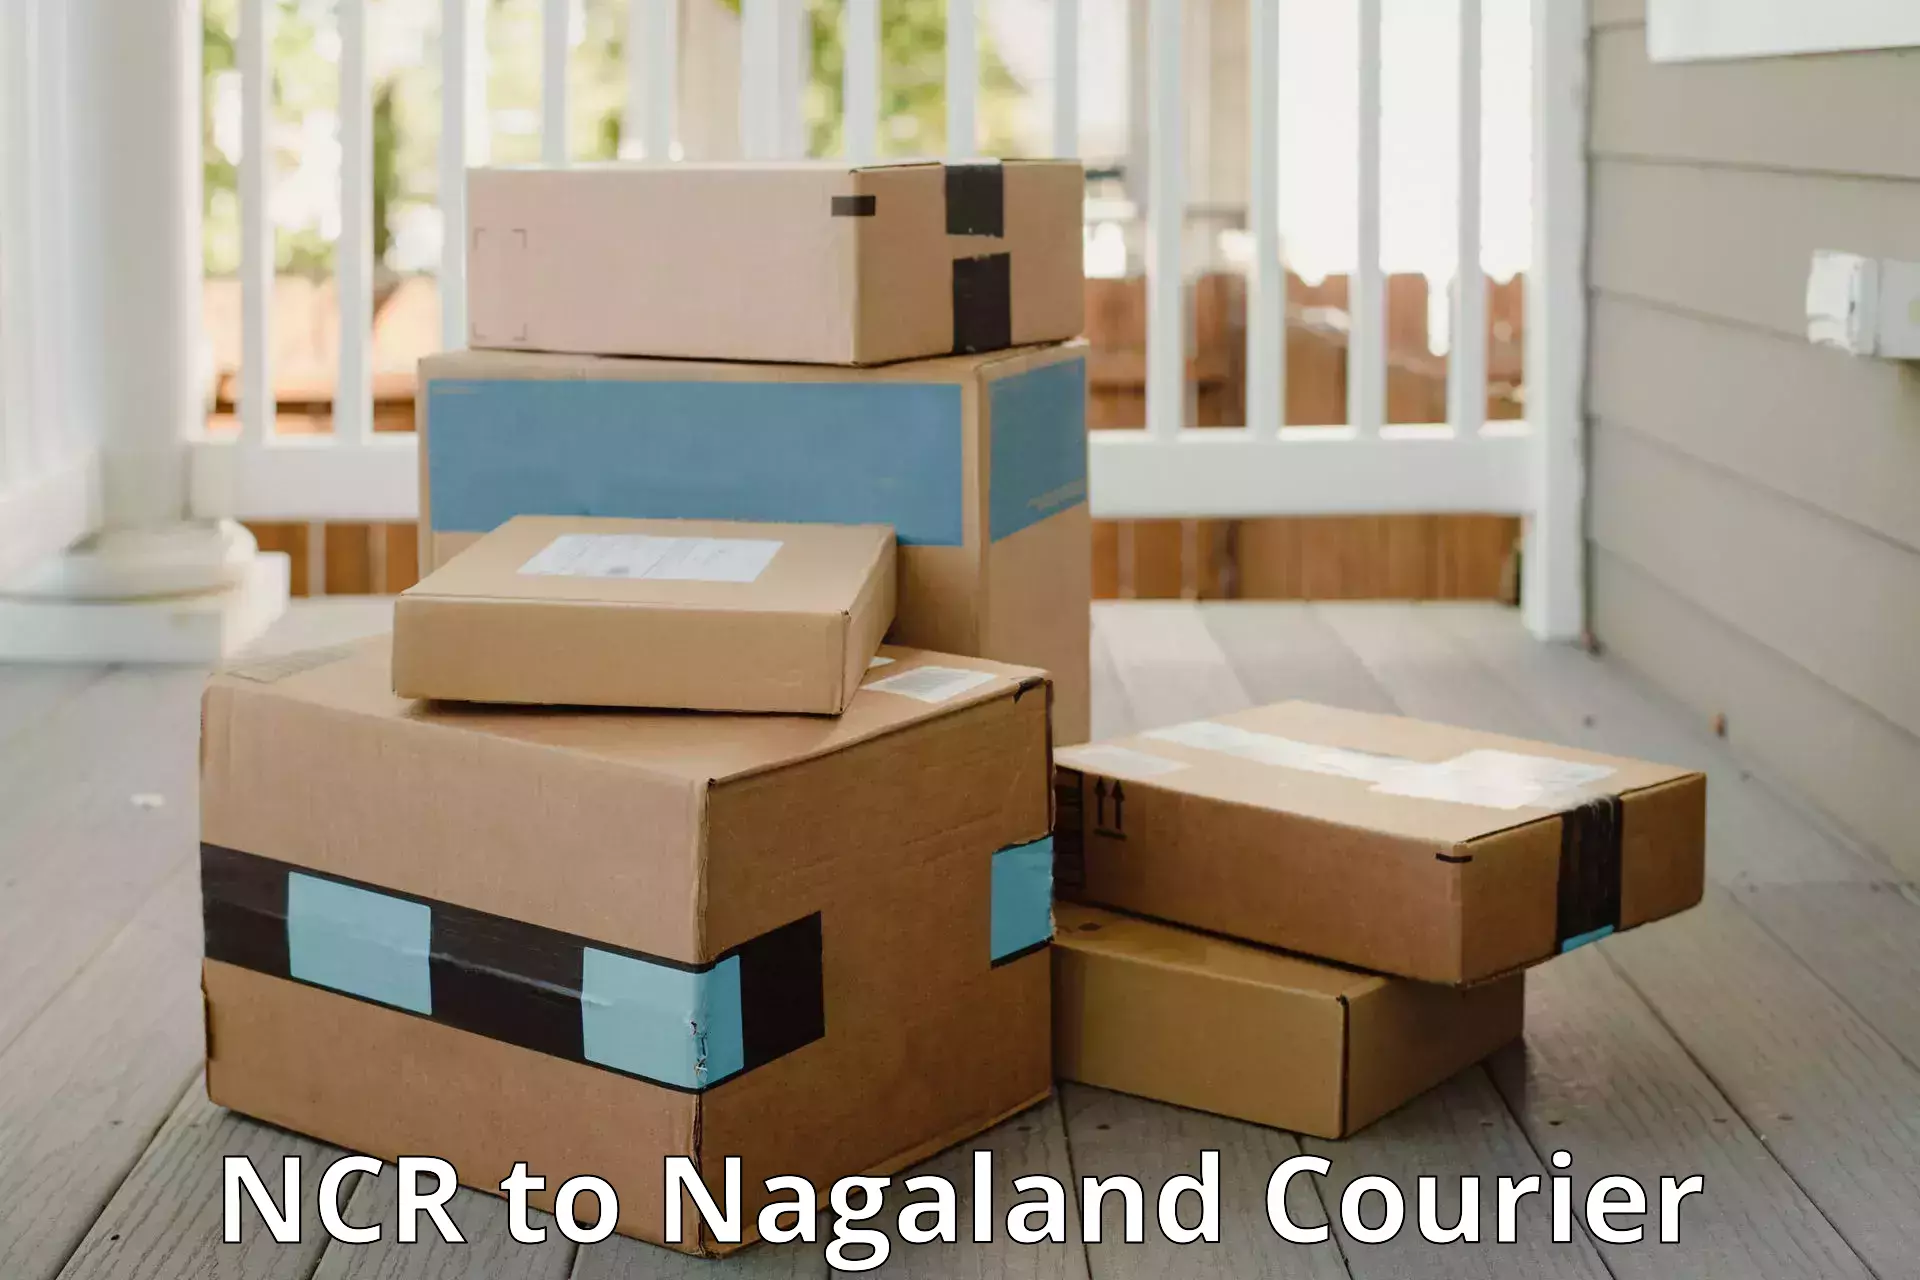 Multi-destination luggage transport in NCR to Nagaland